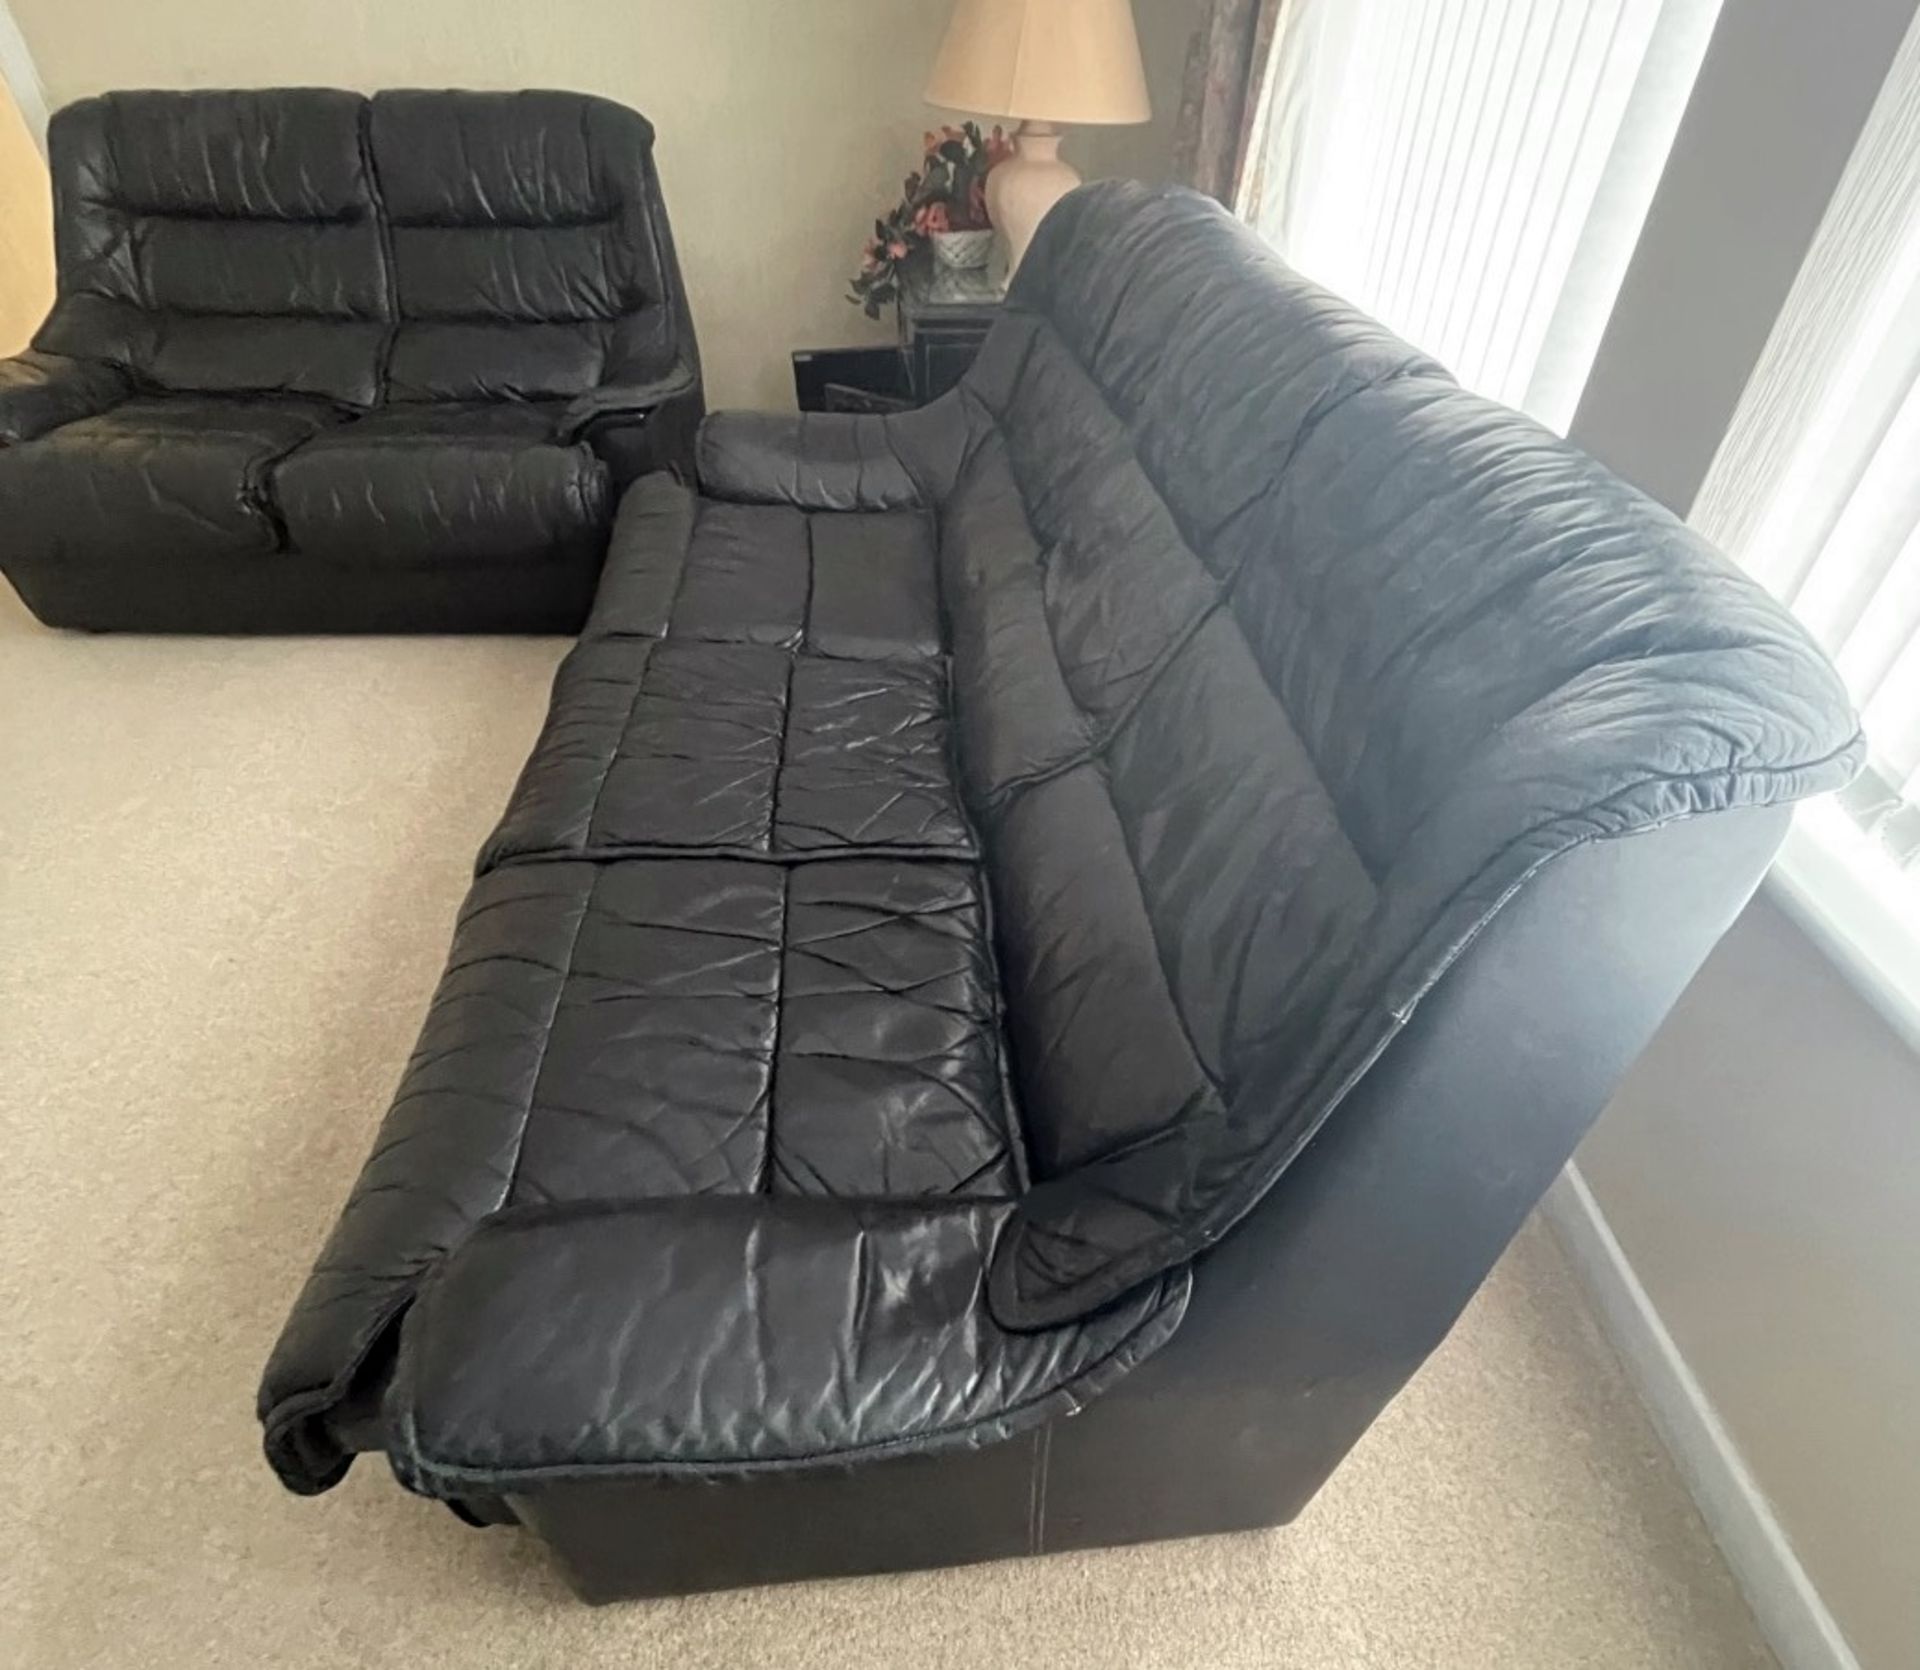 3-Piece Sofa Set In Black - Includes 1 x 3-Seater Sofa, 1 x 2-Seater Sofa & 1 x Footstool - From - Image 8 of 11